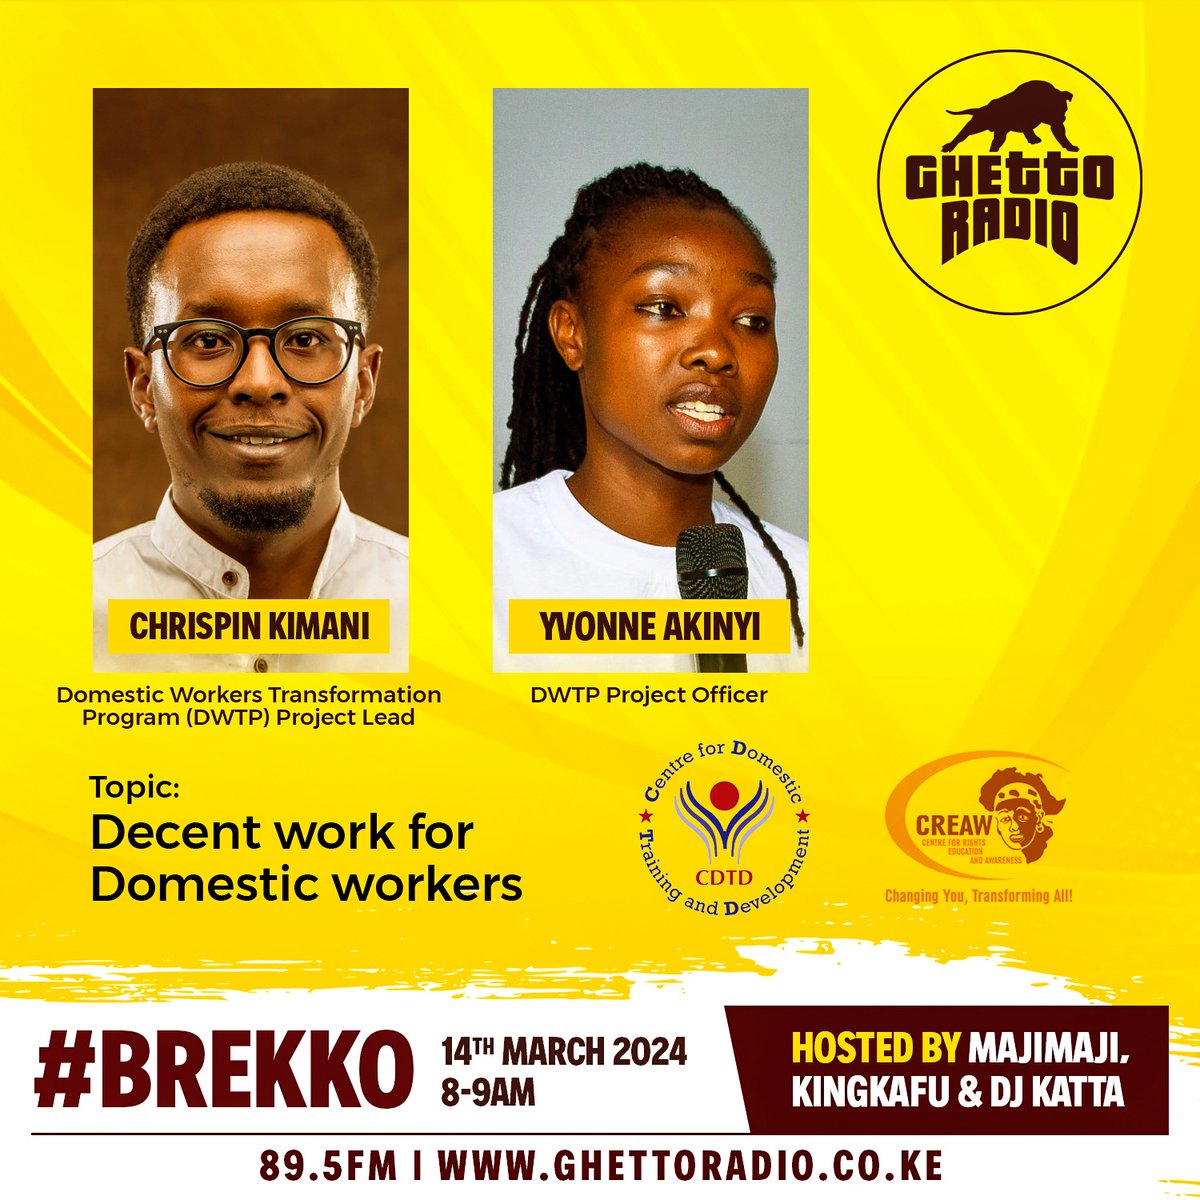 'My objective is to advocate for the rights of domestic workers, their pay is too little na workload ni most!' -Yvonne 

'First ever domestic worker alikua chali, so we're fighting for rights za both gender..' -Chrispin

#TrueGhettoStory #Brekko @CREAWKenya